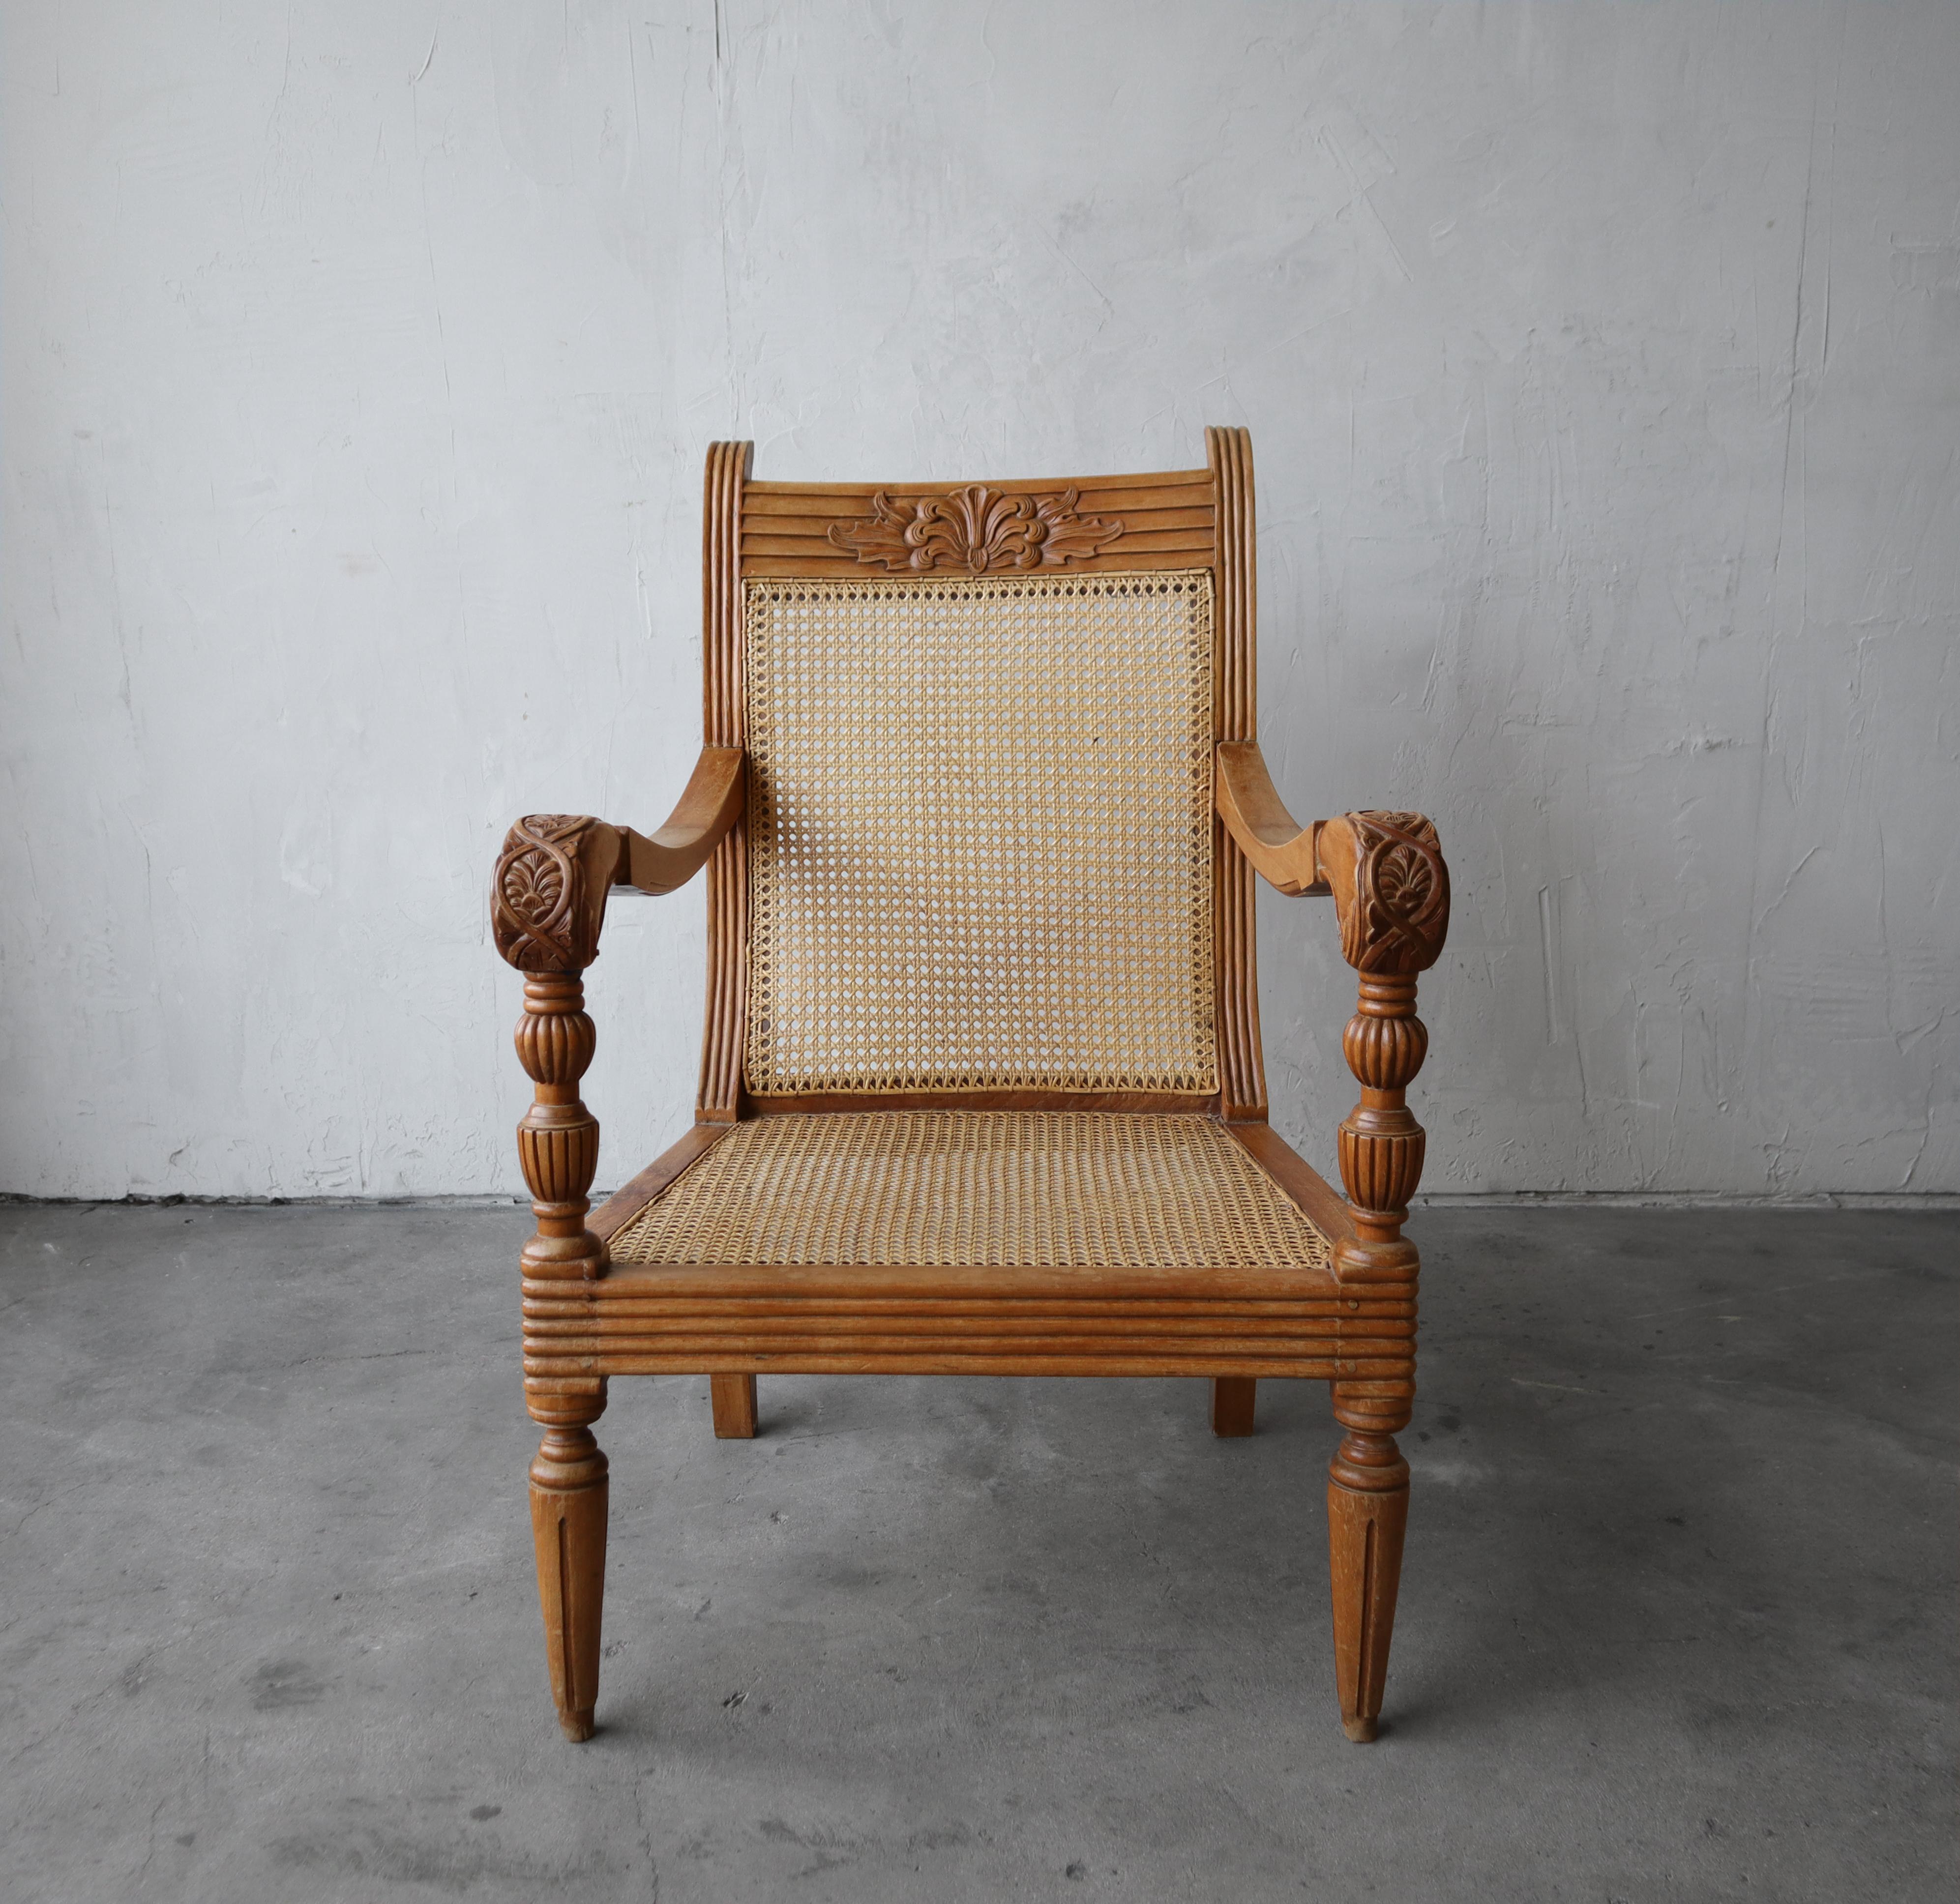 20th Century Antique British Colonial Cane and Carved Teak Lounge Chair For Sale